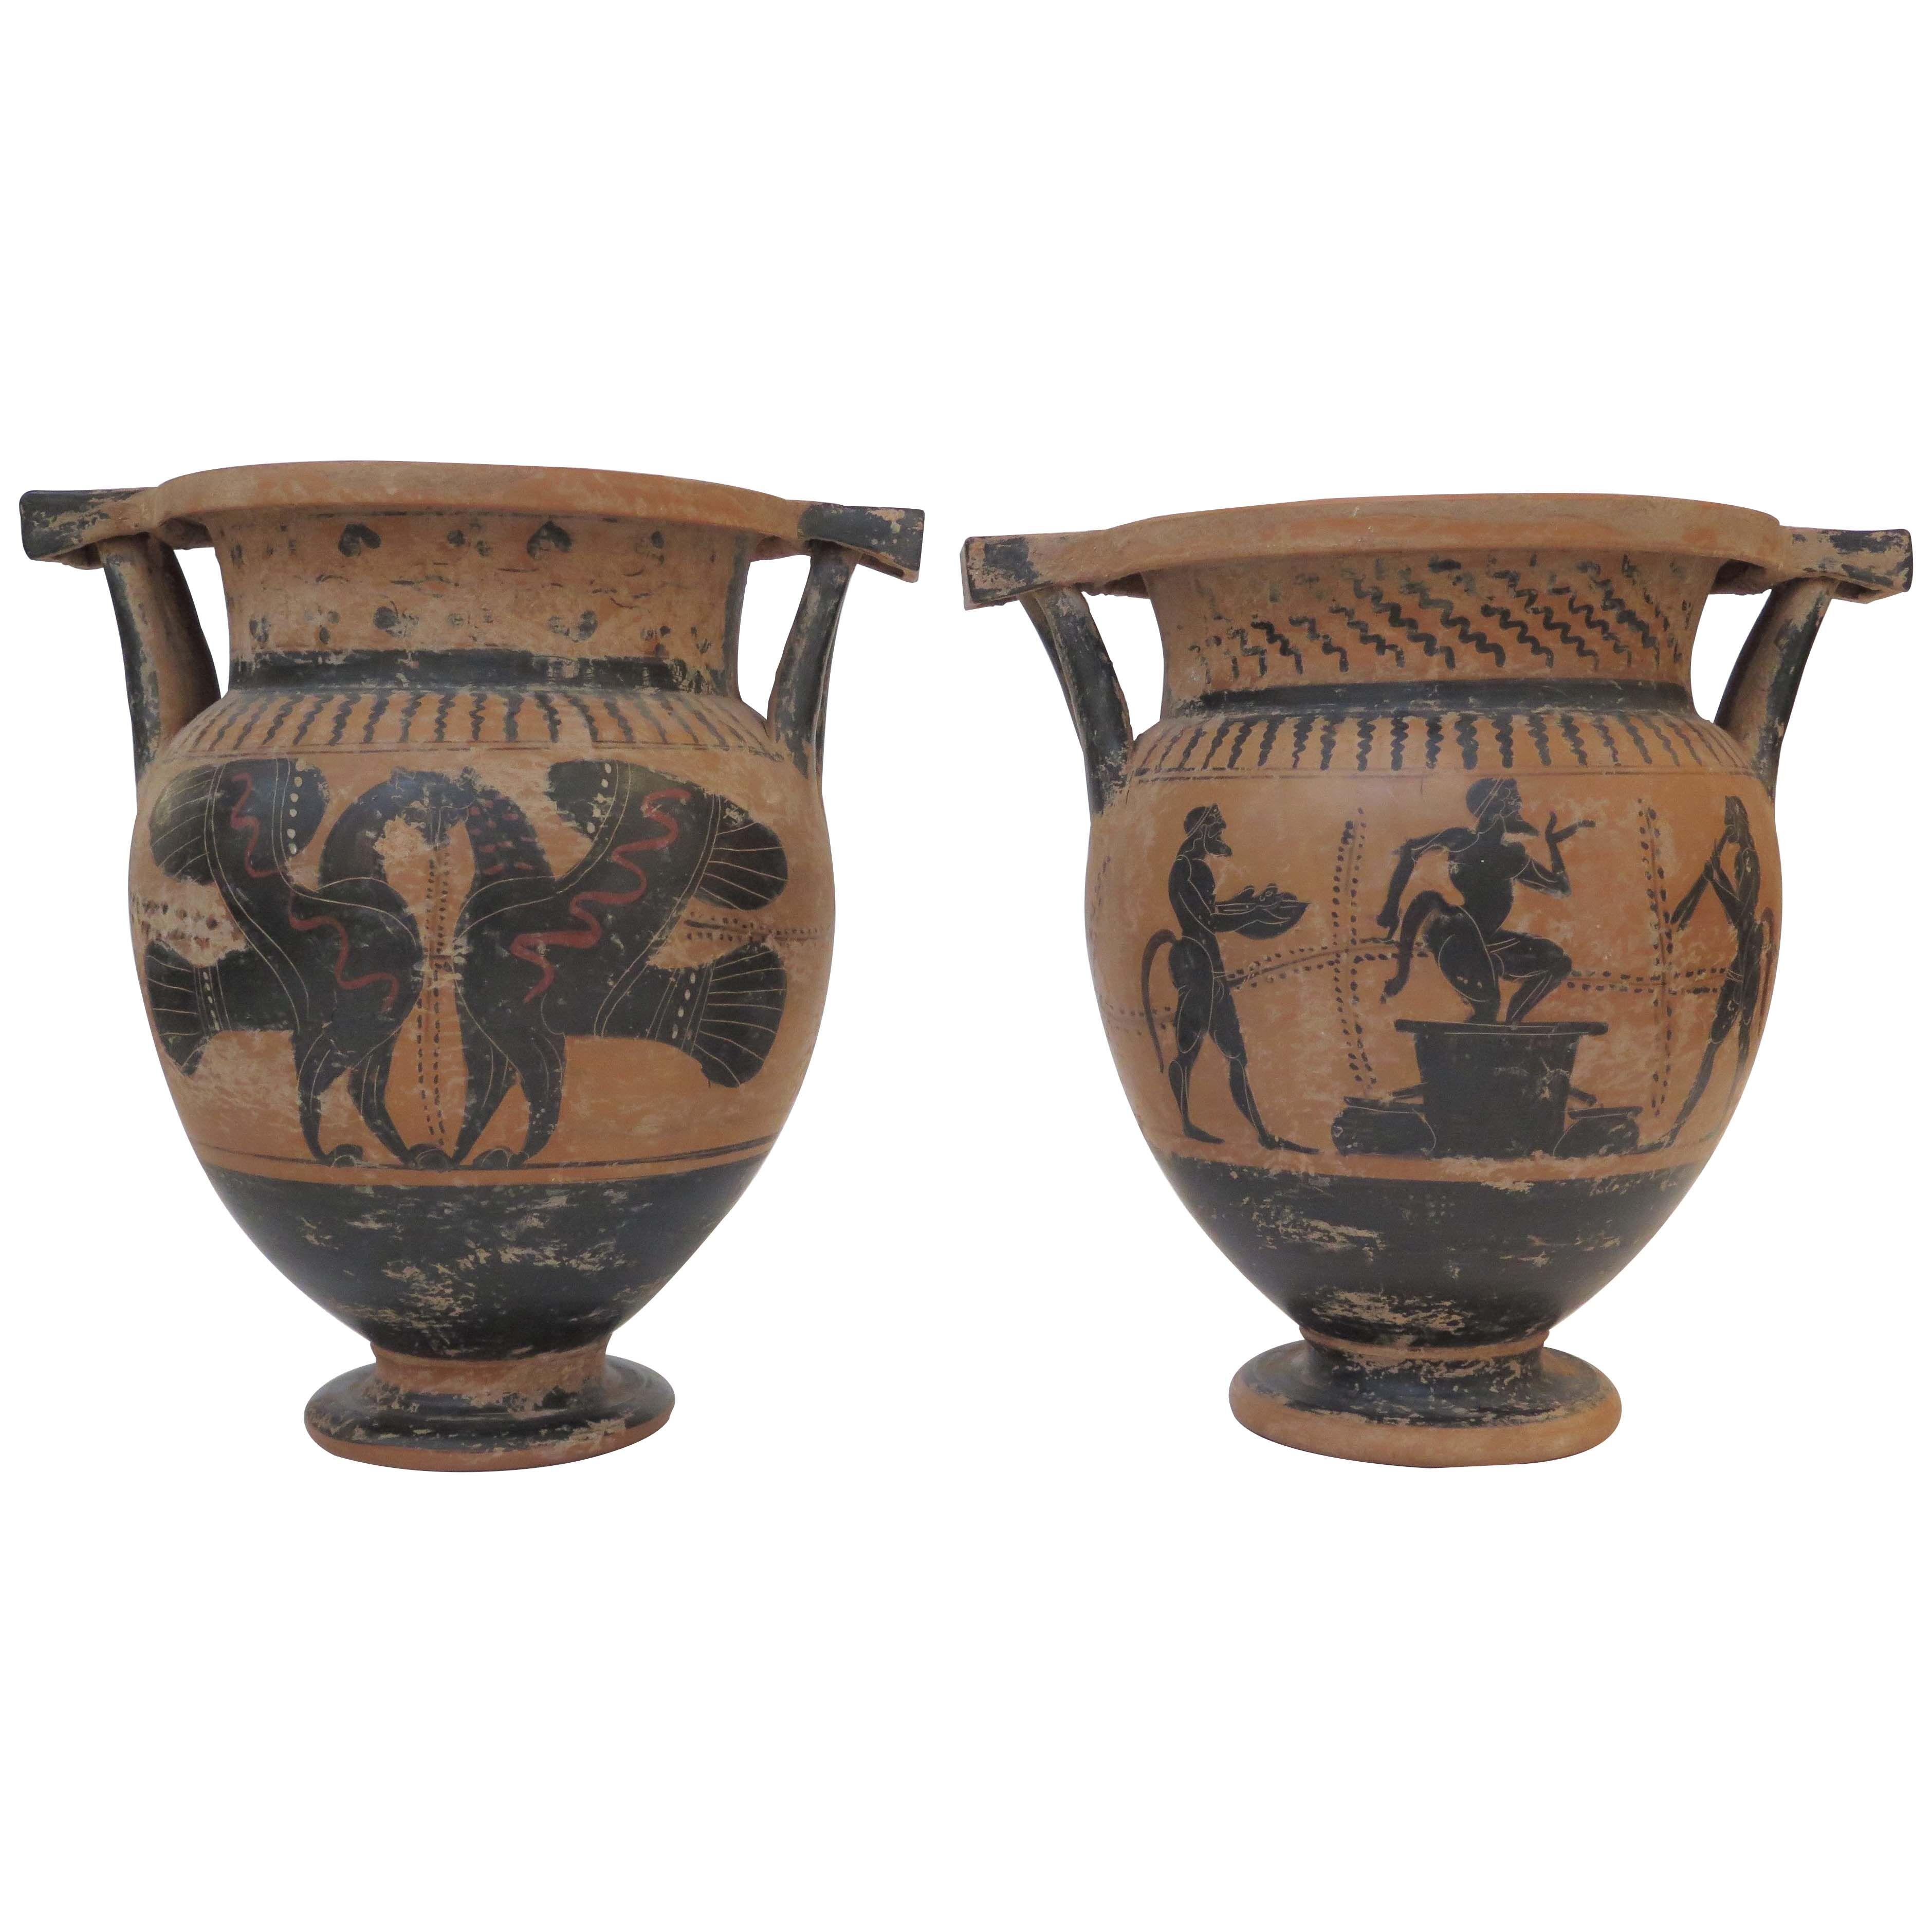 A Pair of Greek Classical Style Column-Kraters